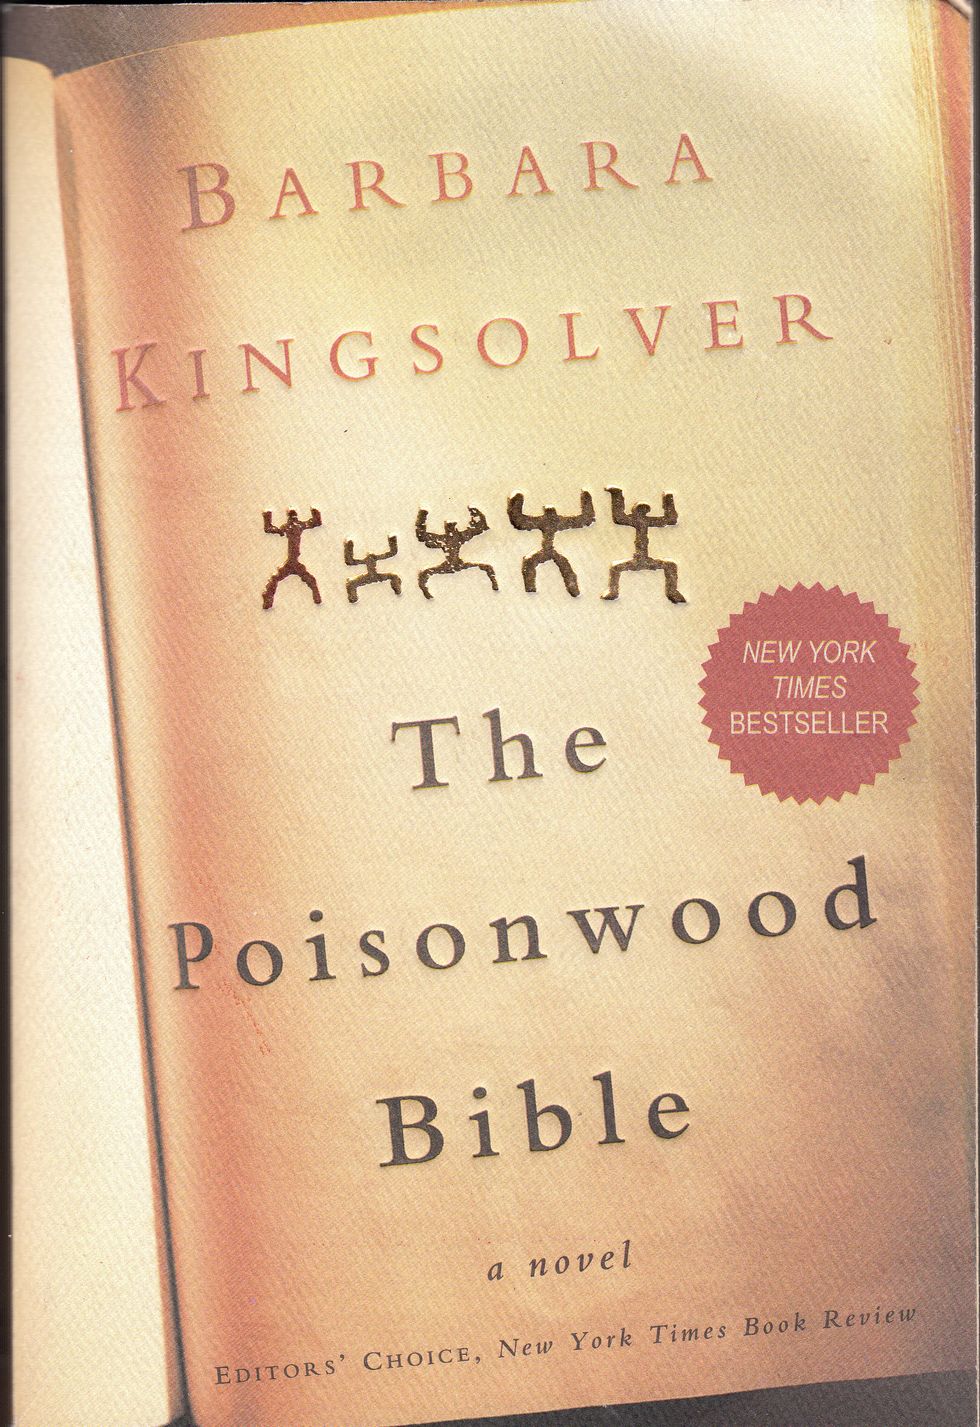 Thoughts on "The Poisonwood Bible"